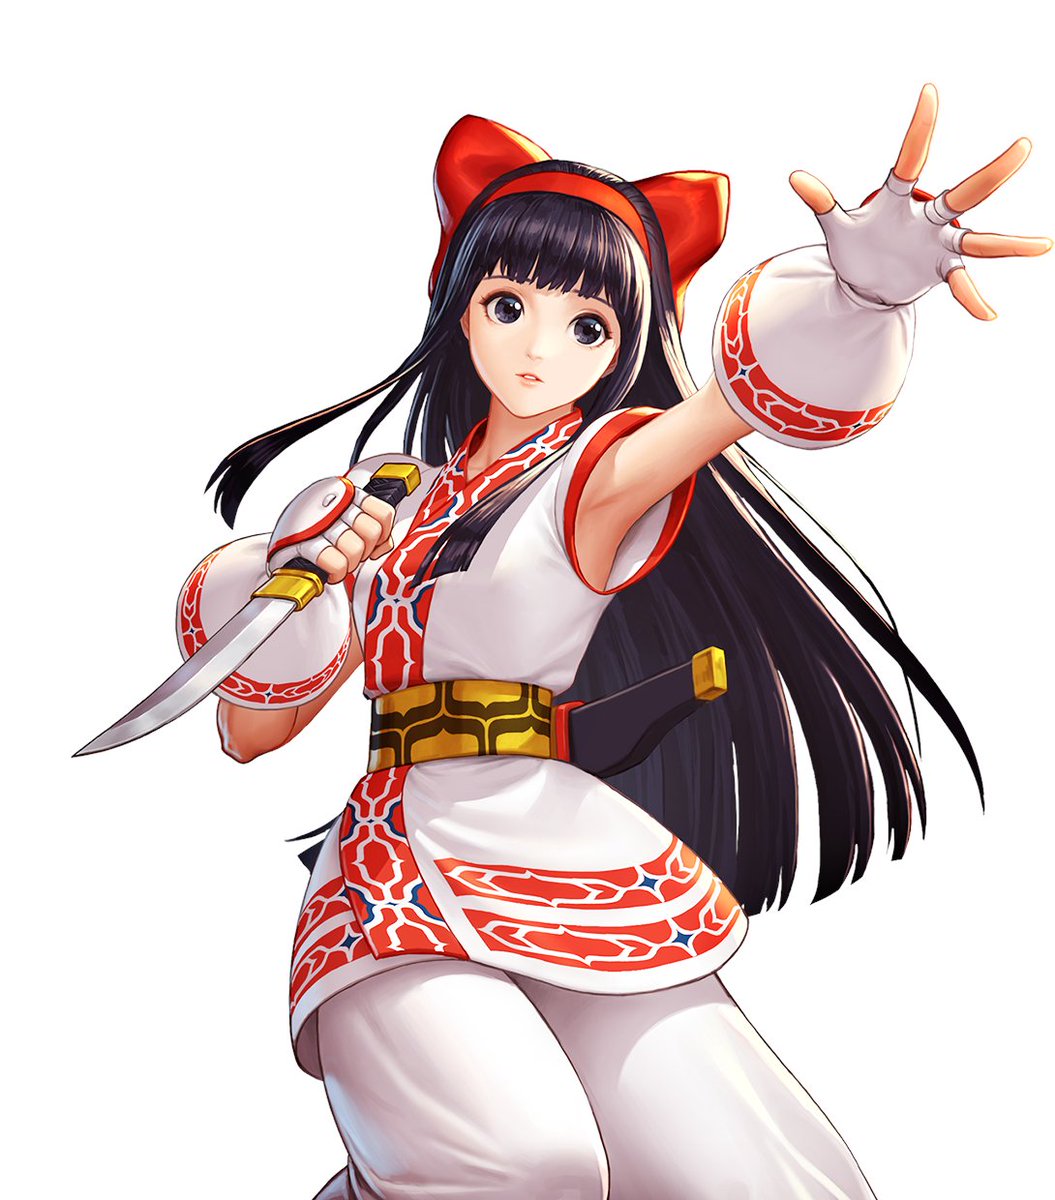 NAKORURU - "Mother Nature's Guardian"Age: 17Country: JapanTeam: Another World TeamOrigins: Samurai Showdownone of snk's most popular characters and the face of their other fighting game franchise, samurai showdown. nakoruru is an ainu priestess who fights for nature.